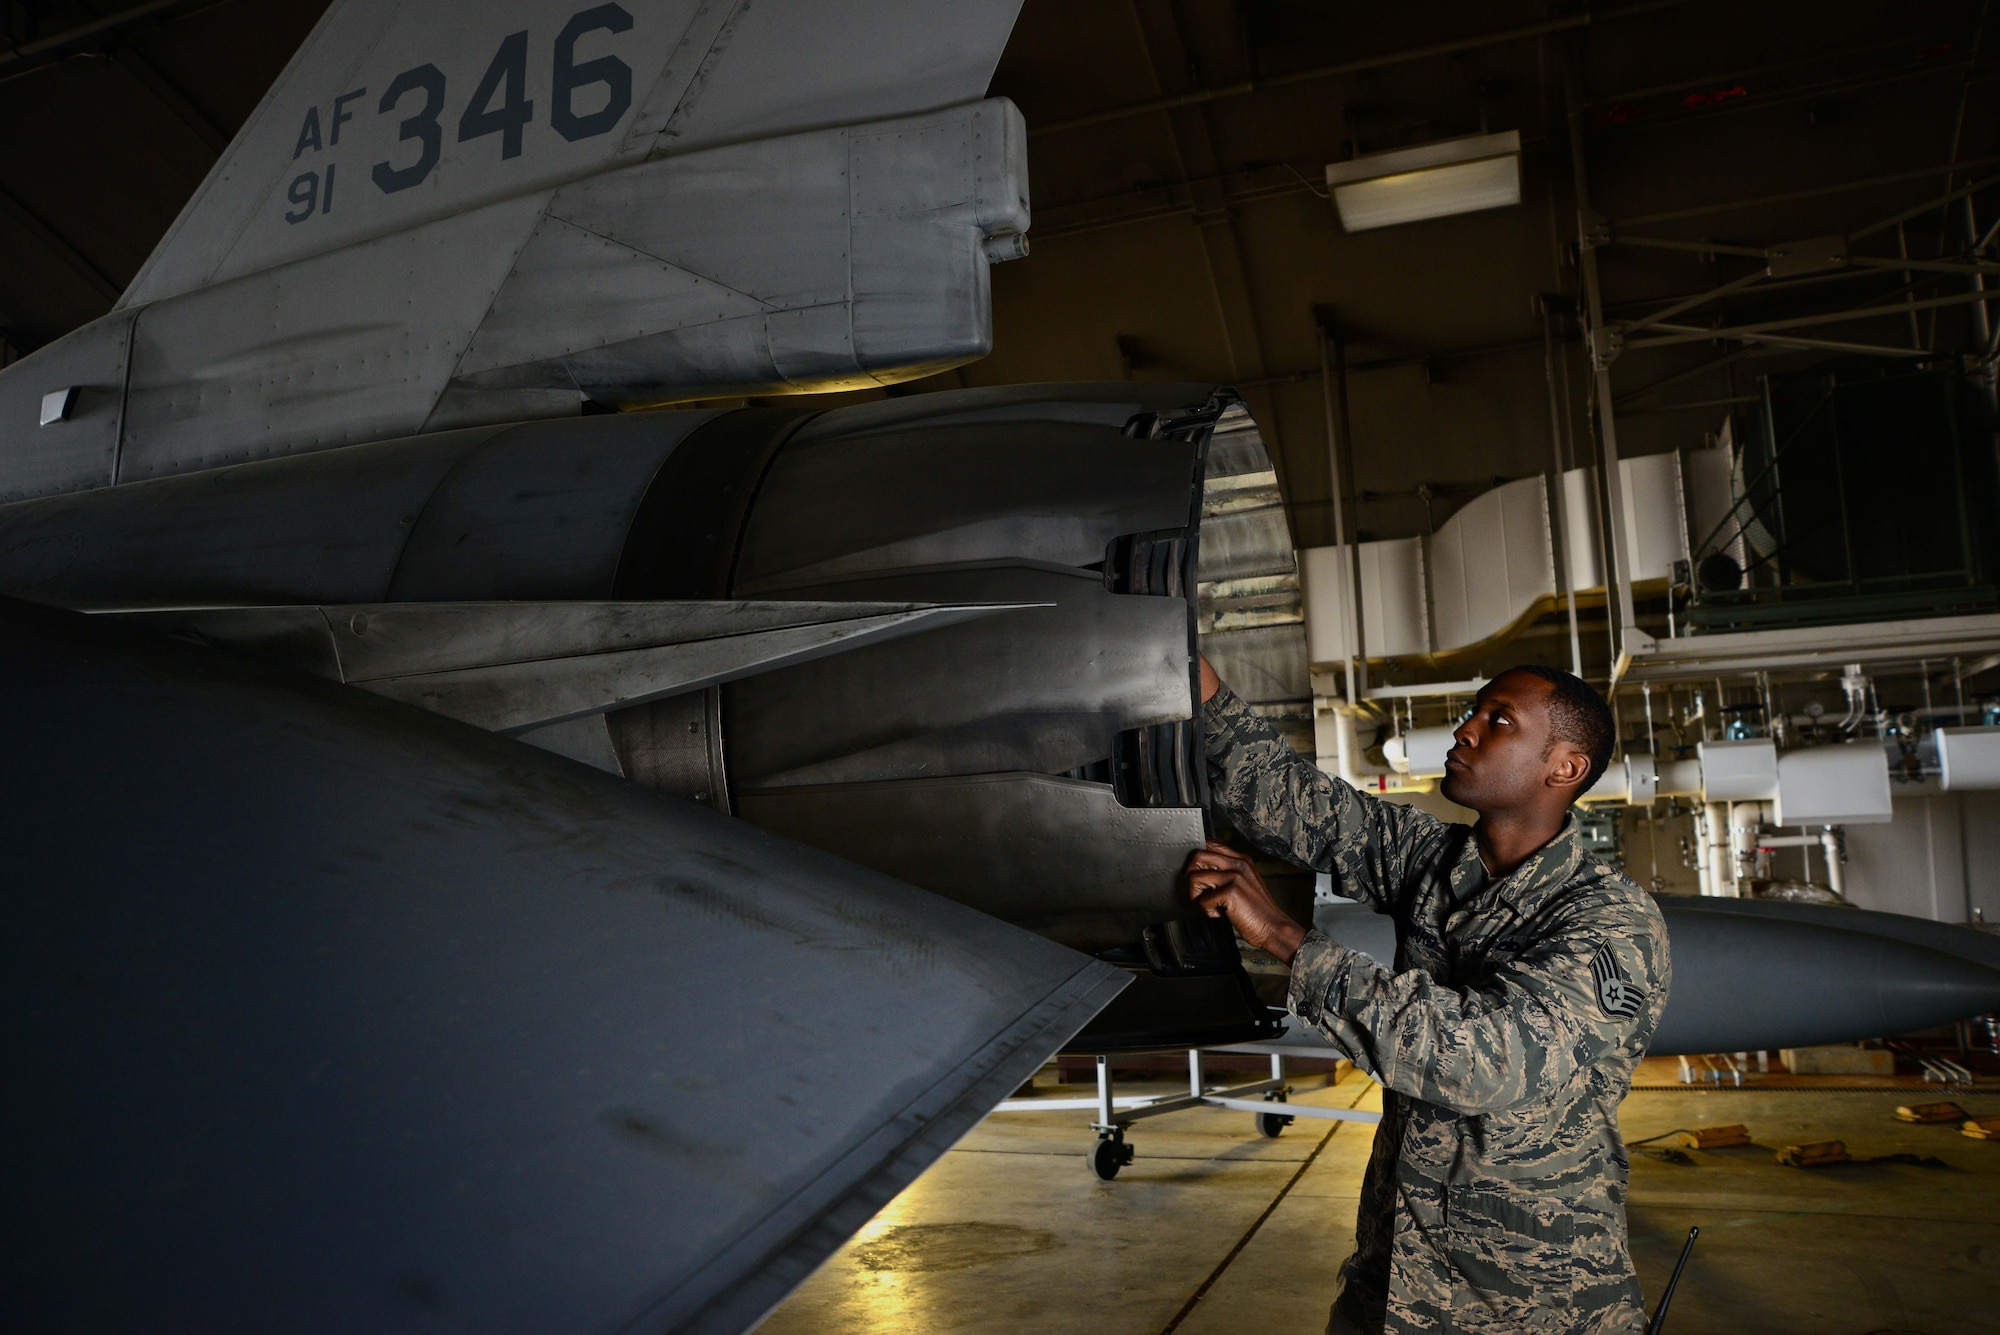 Staff Sgt. Jeremy Howard inspects the exhaust of an F-16 Fighting Falcon June 6, 2014, at Misawa Air Base, Japan. Howard works with flightline aerospace propulsion and runs extensive tests on F-16 engines at Misawa AB using computer programs to analyze and monitor different parameters to ensure they’re functioning properly. Howard is a 35th Aircraft Maintenance Squadron aerospace propulsion craftsman. (U.S. Air Force photo/Senior Airman Derek VanHorn)